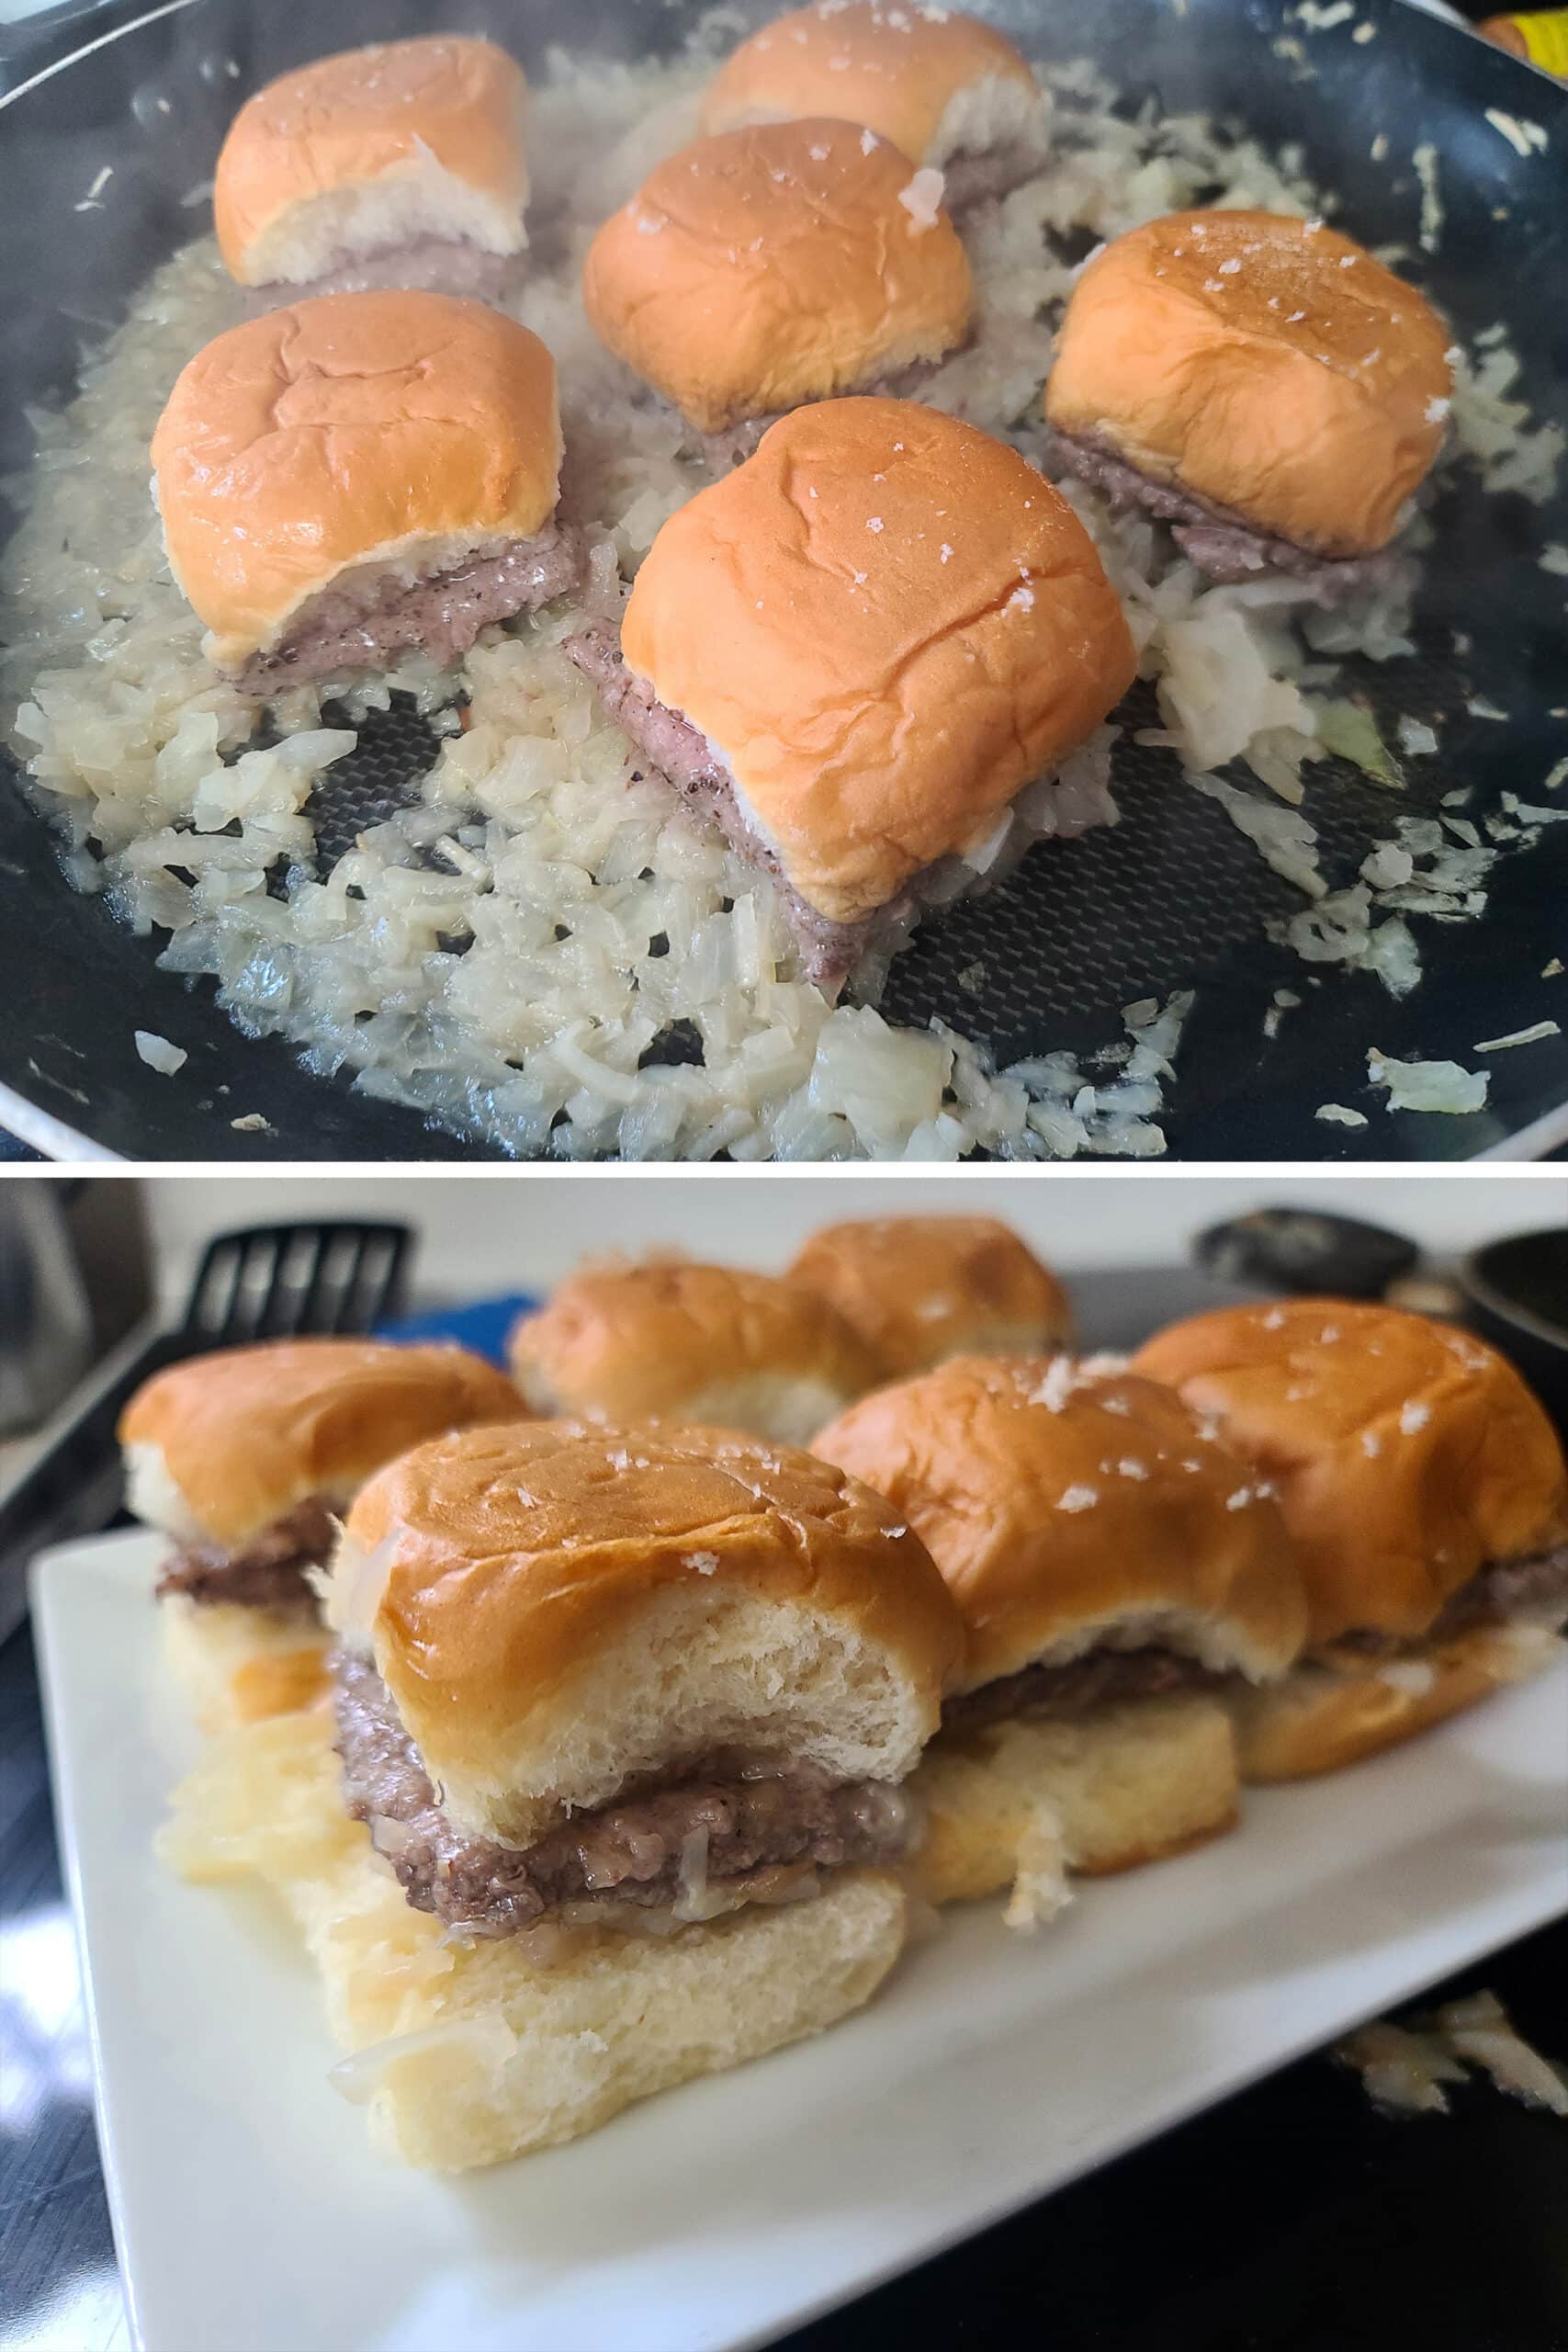 A 2 part image showing the burger patties being covered with buns, then the patties and tops placed on the bun bottoms on a plate.